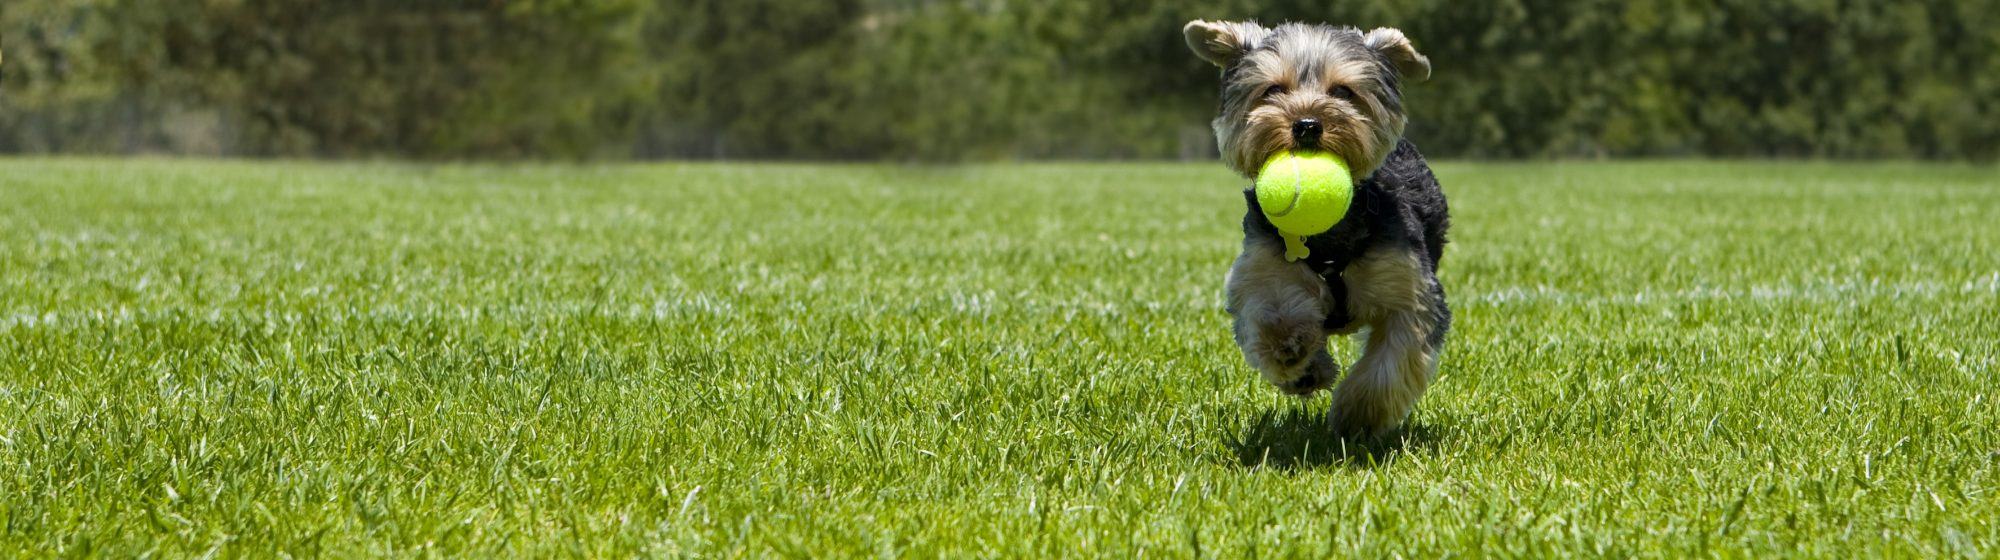 Small Dog Running with Ball